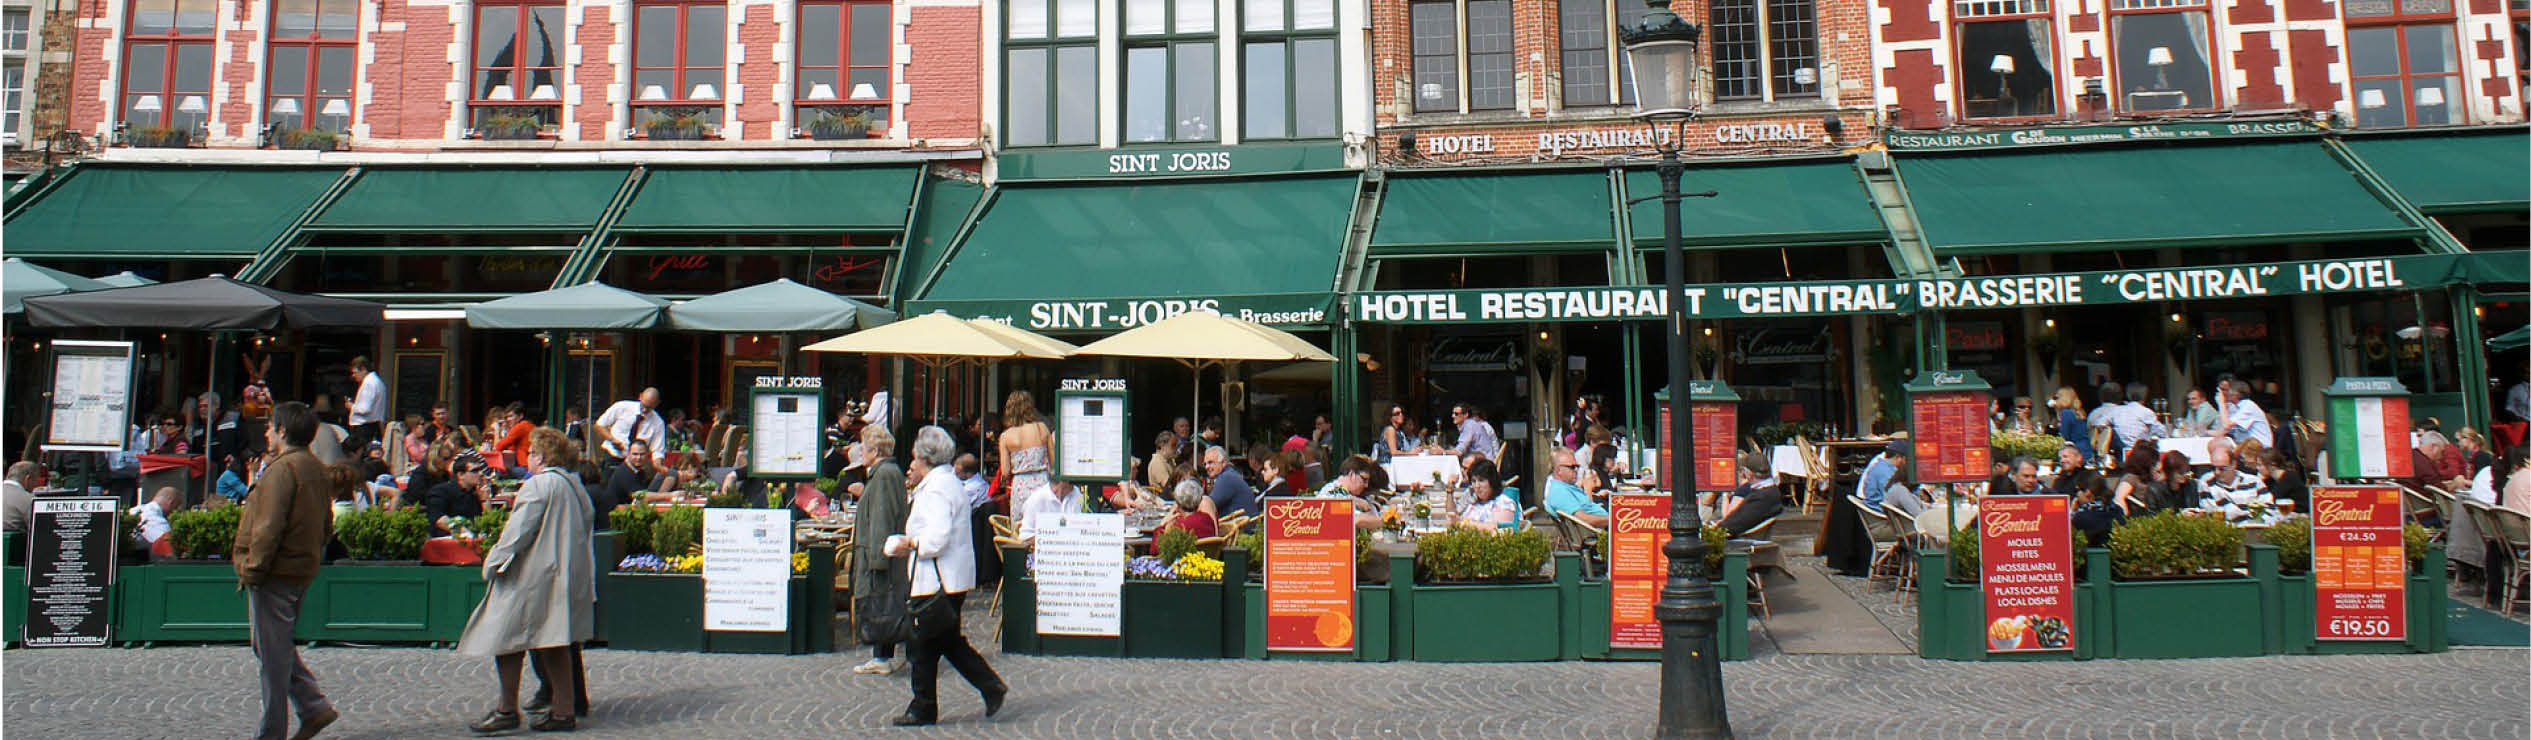 people sitting outside cafes in europe